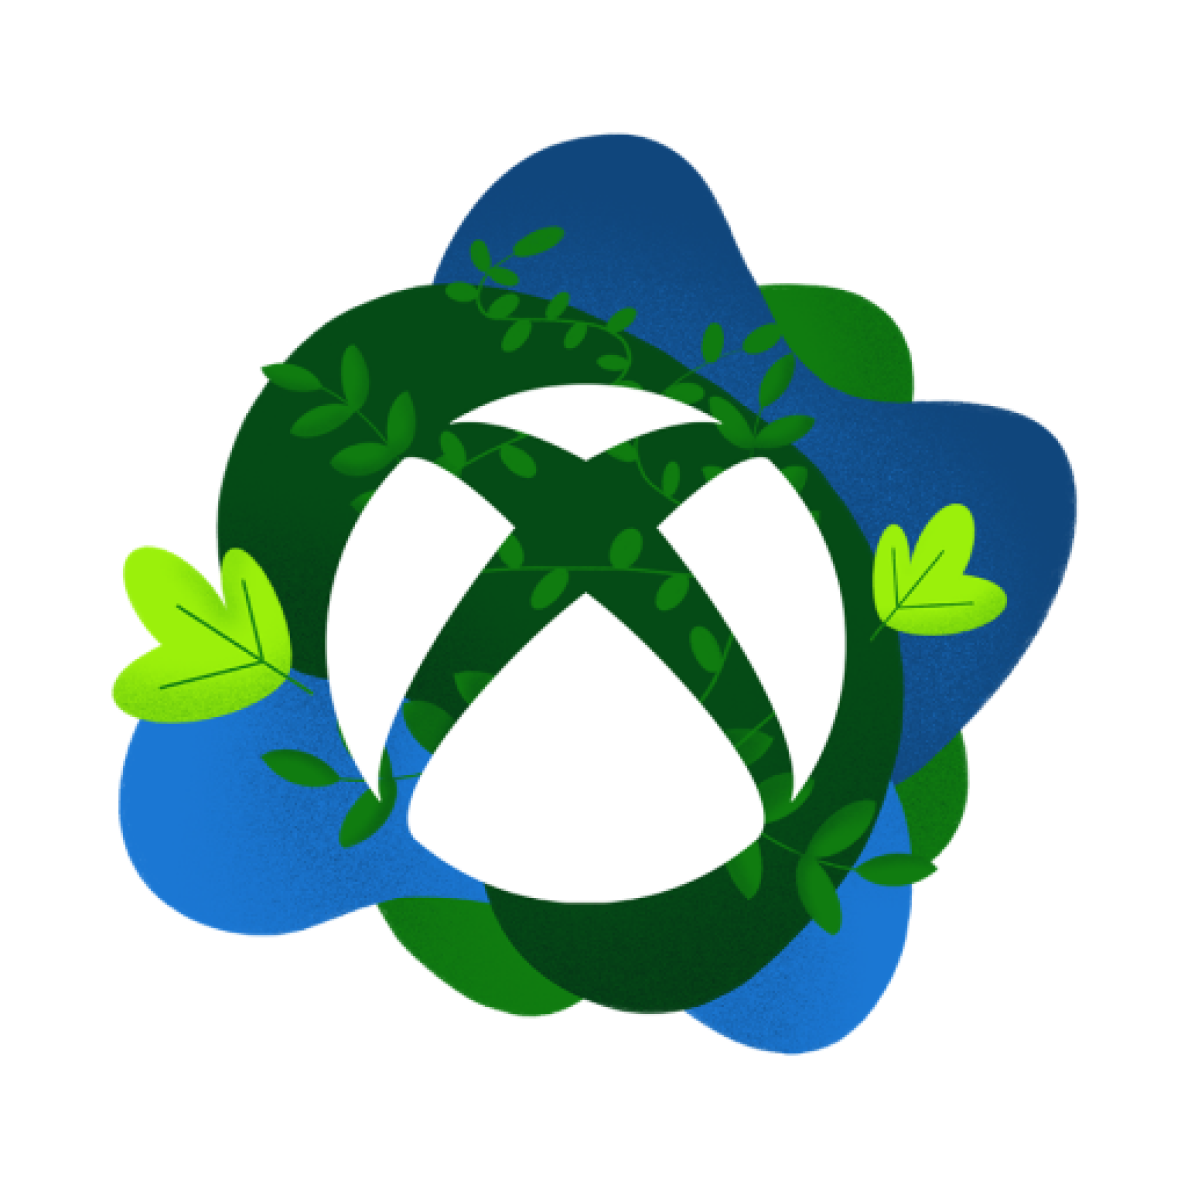 Illustration of the Xbox logo with sustainability-focused treatments, including leaves and clouds.